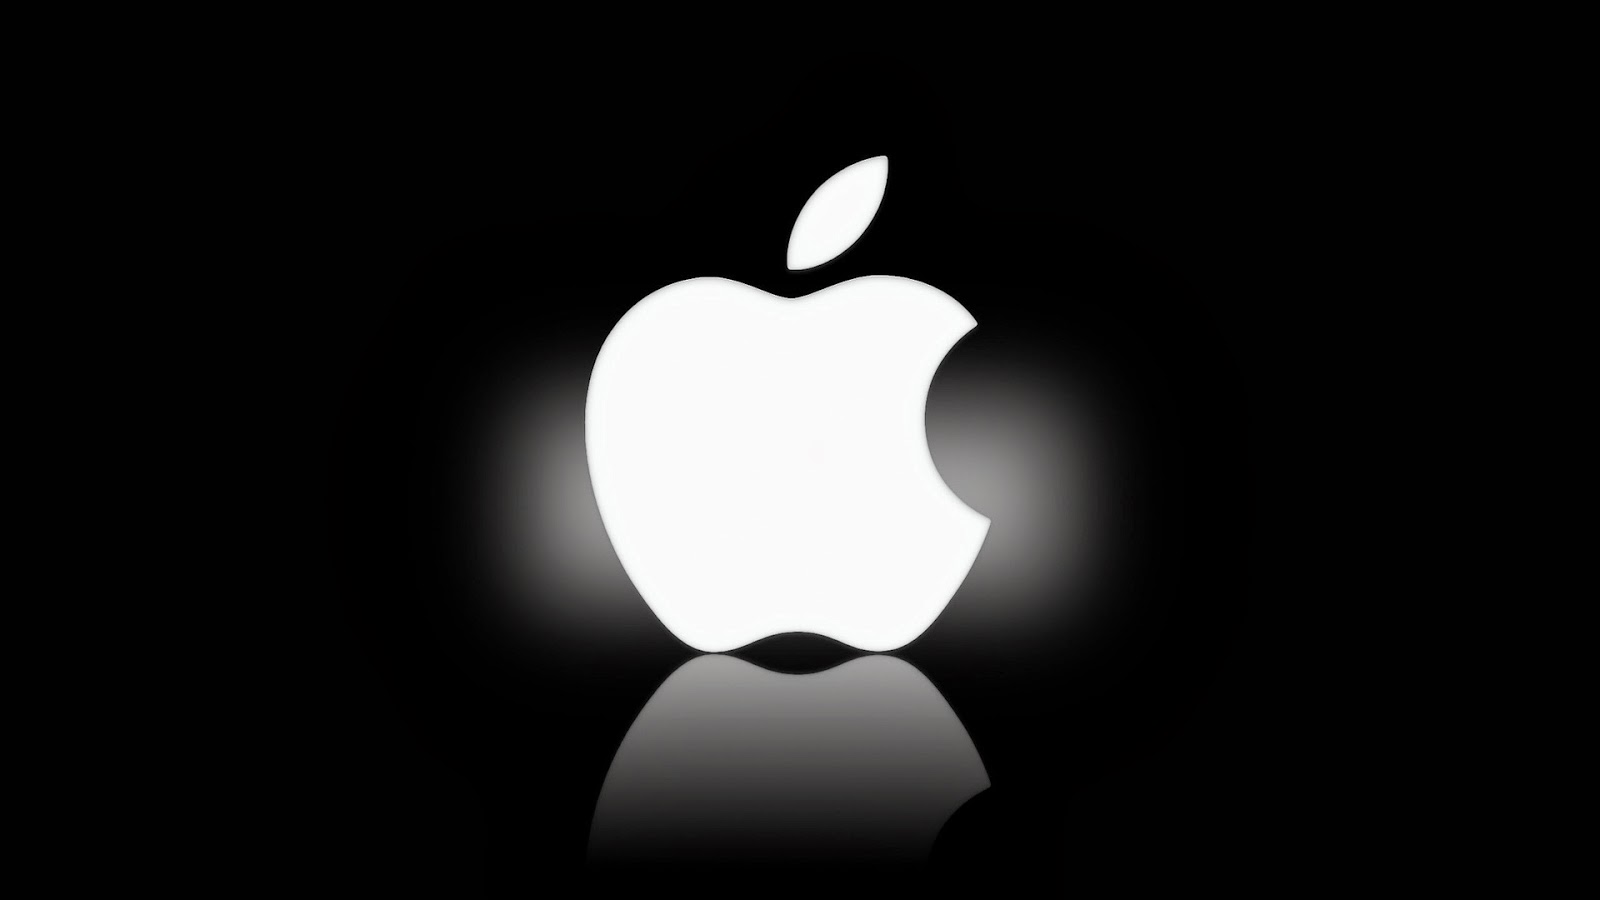 Apple Logo HD Wallpapers Background   Top HD Wallpapers